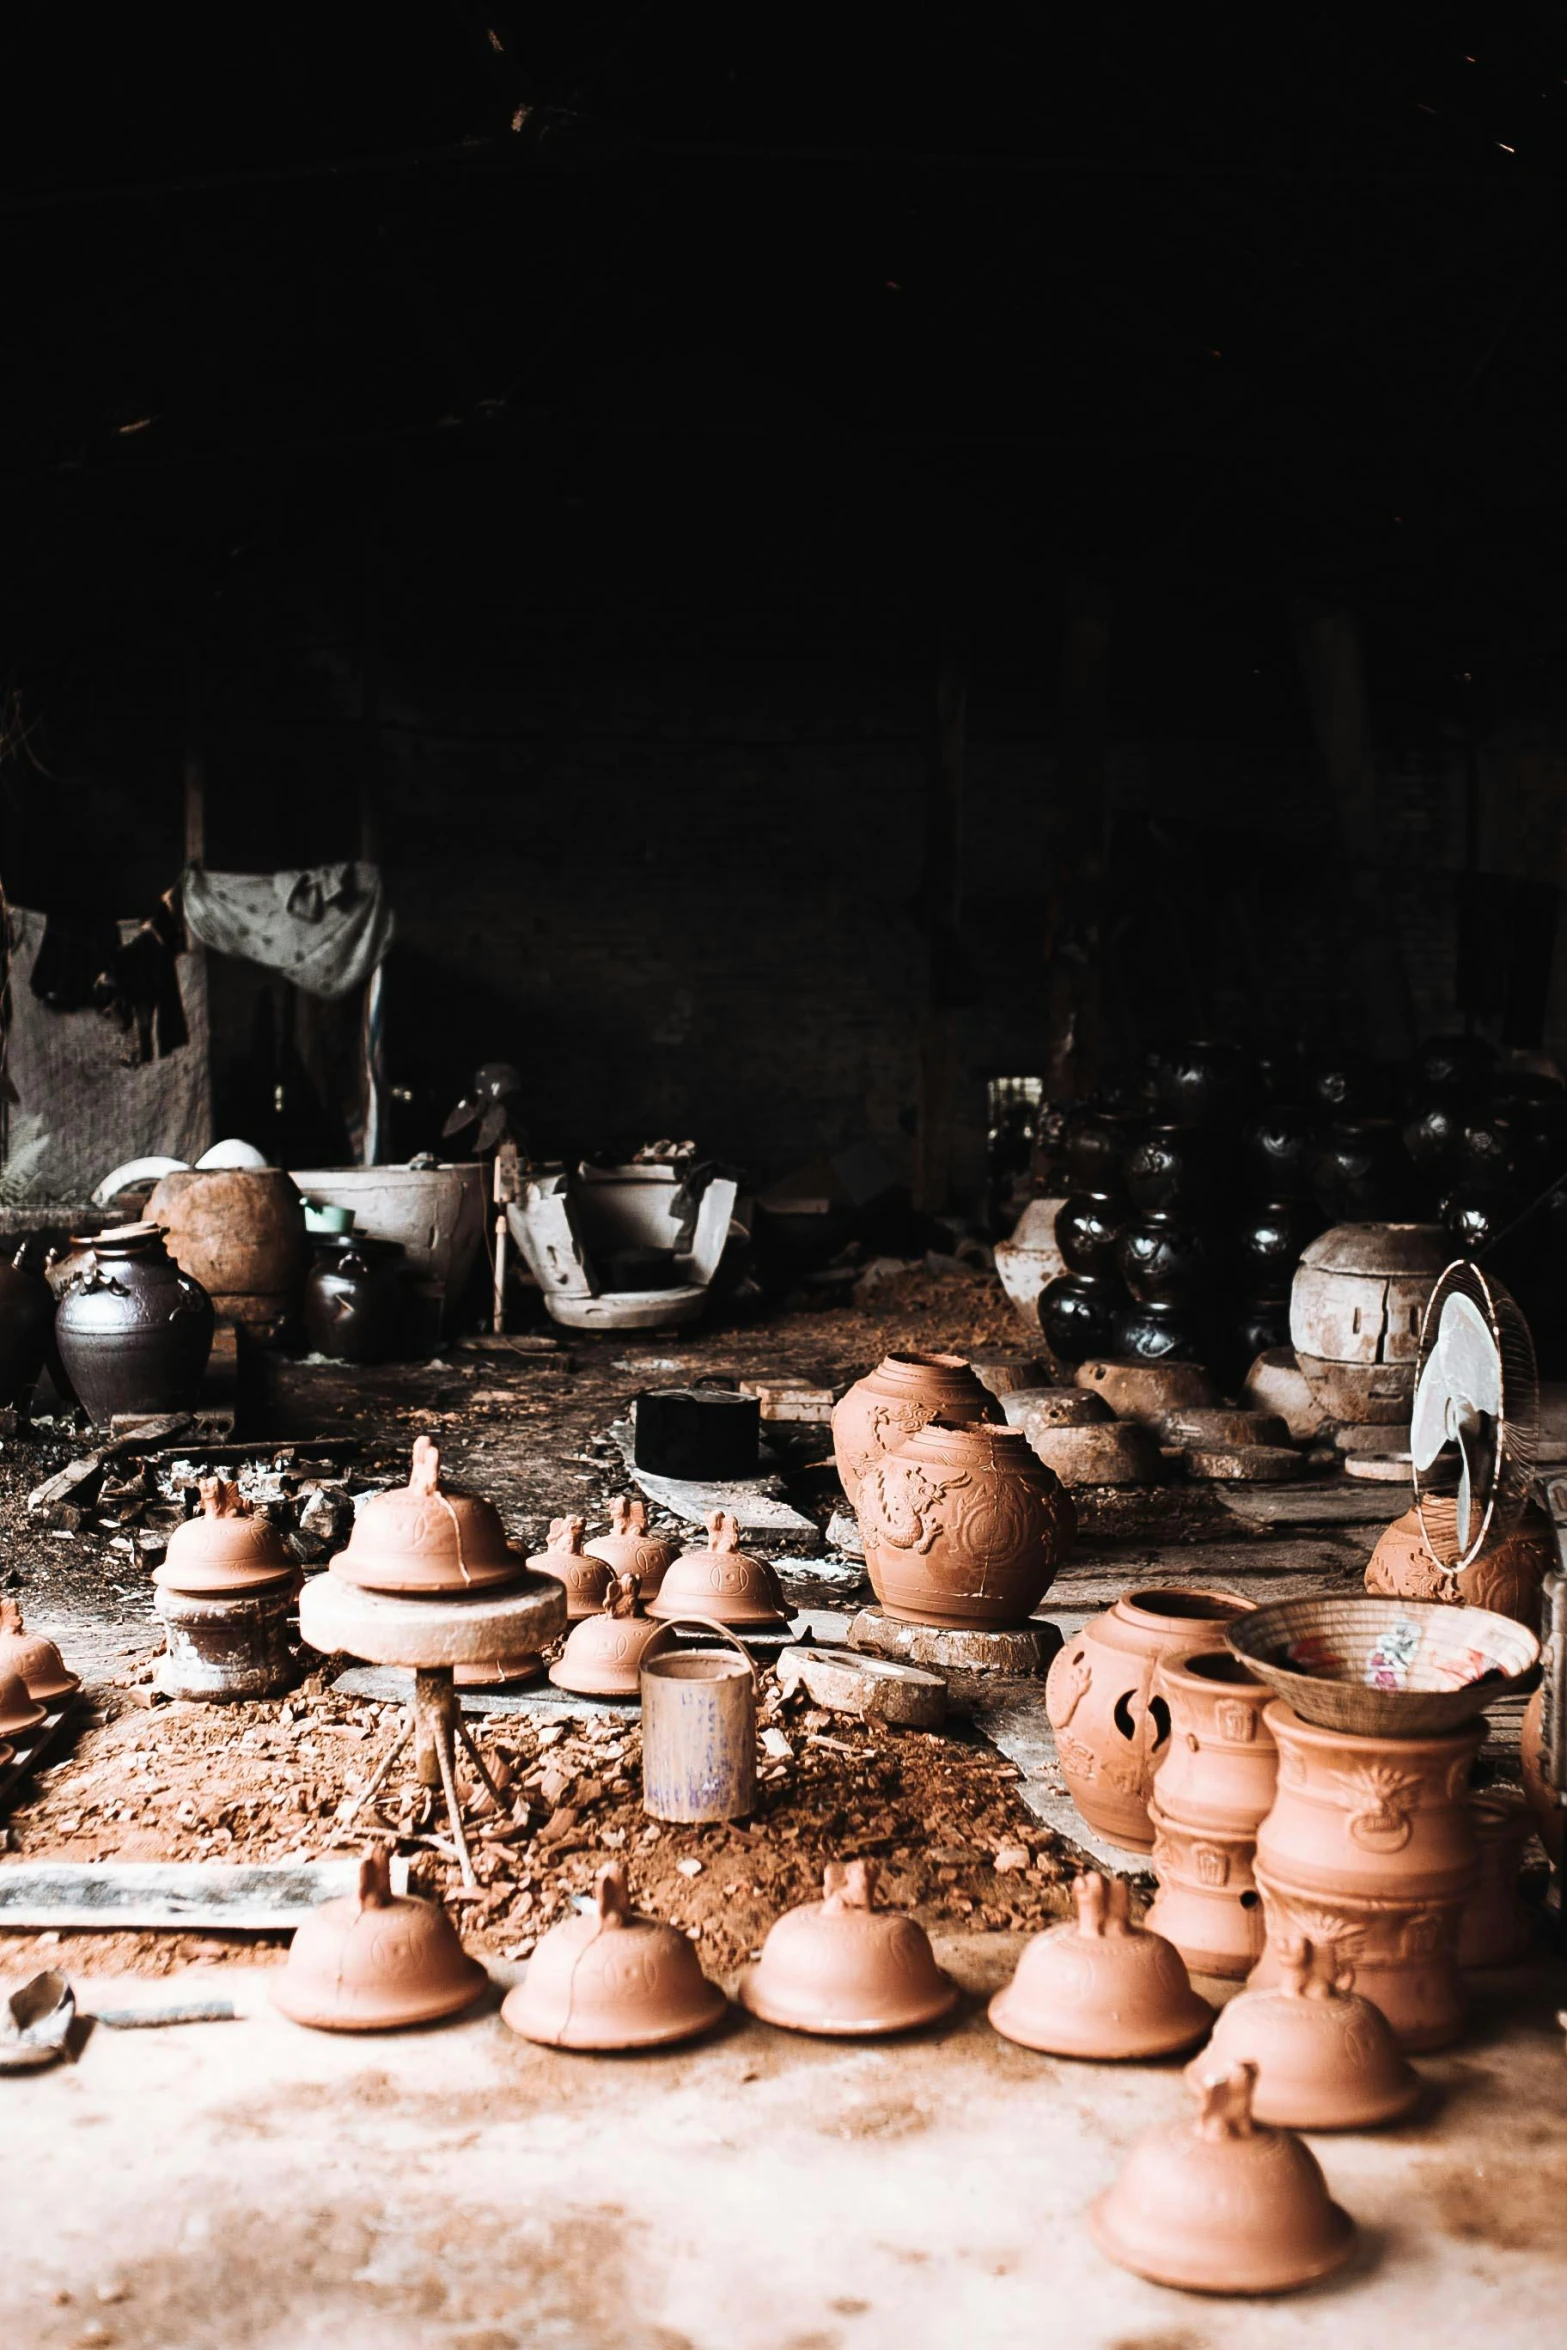 an arrangement of pottery is on the floor in front of several pots